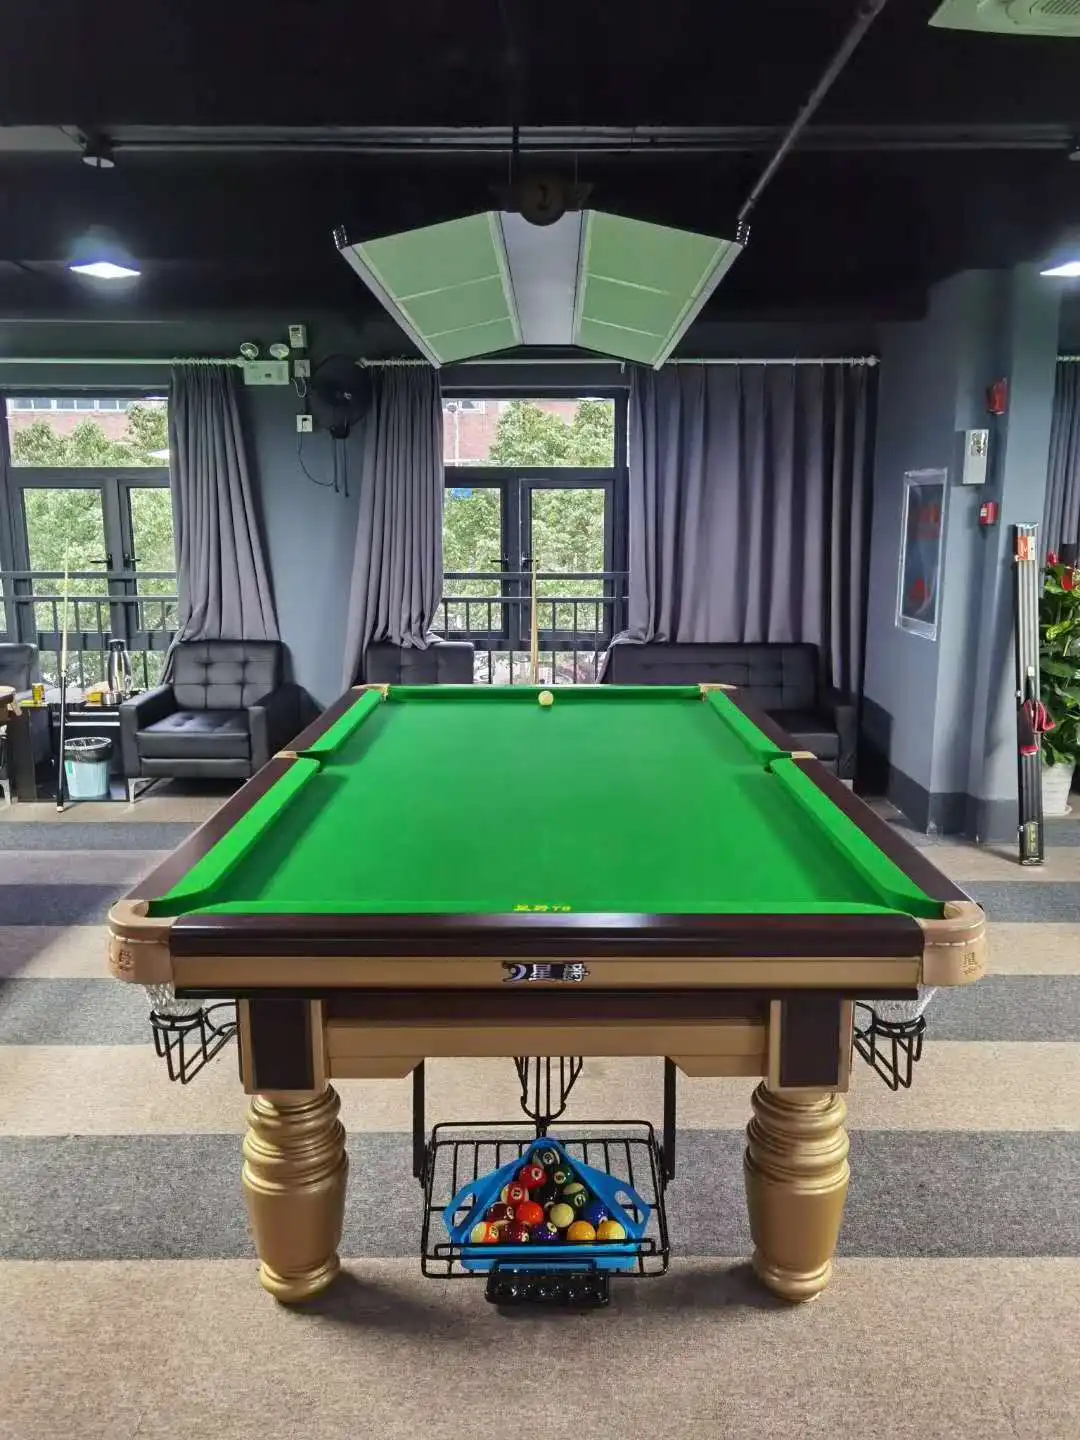 Chinese 8 Ball Billiard Tables Made In China - Buy Chinese 8 Ball Billiard  Tables,Chinese 8 Ball,8 Ball Billiard Tables Product on Alibaba.com